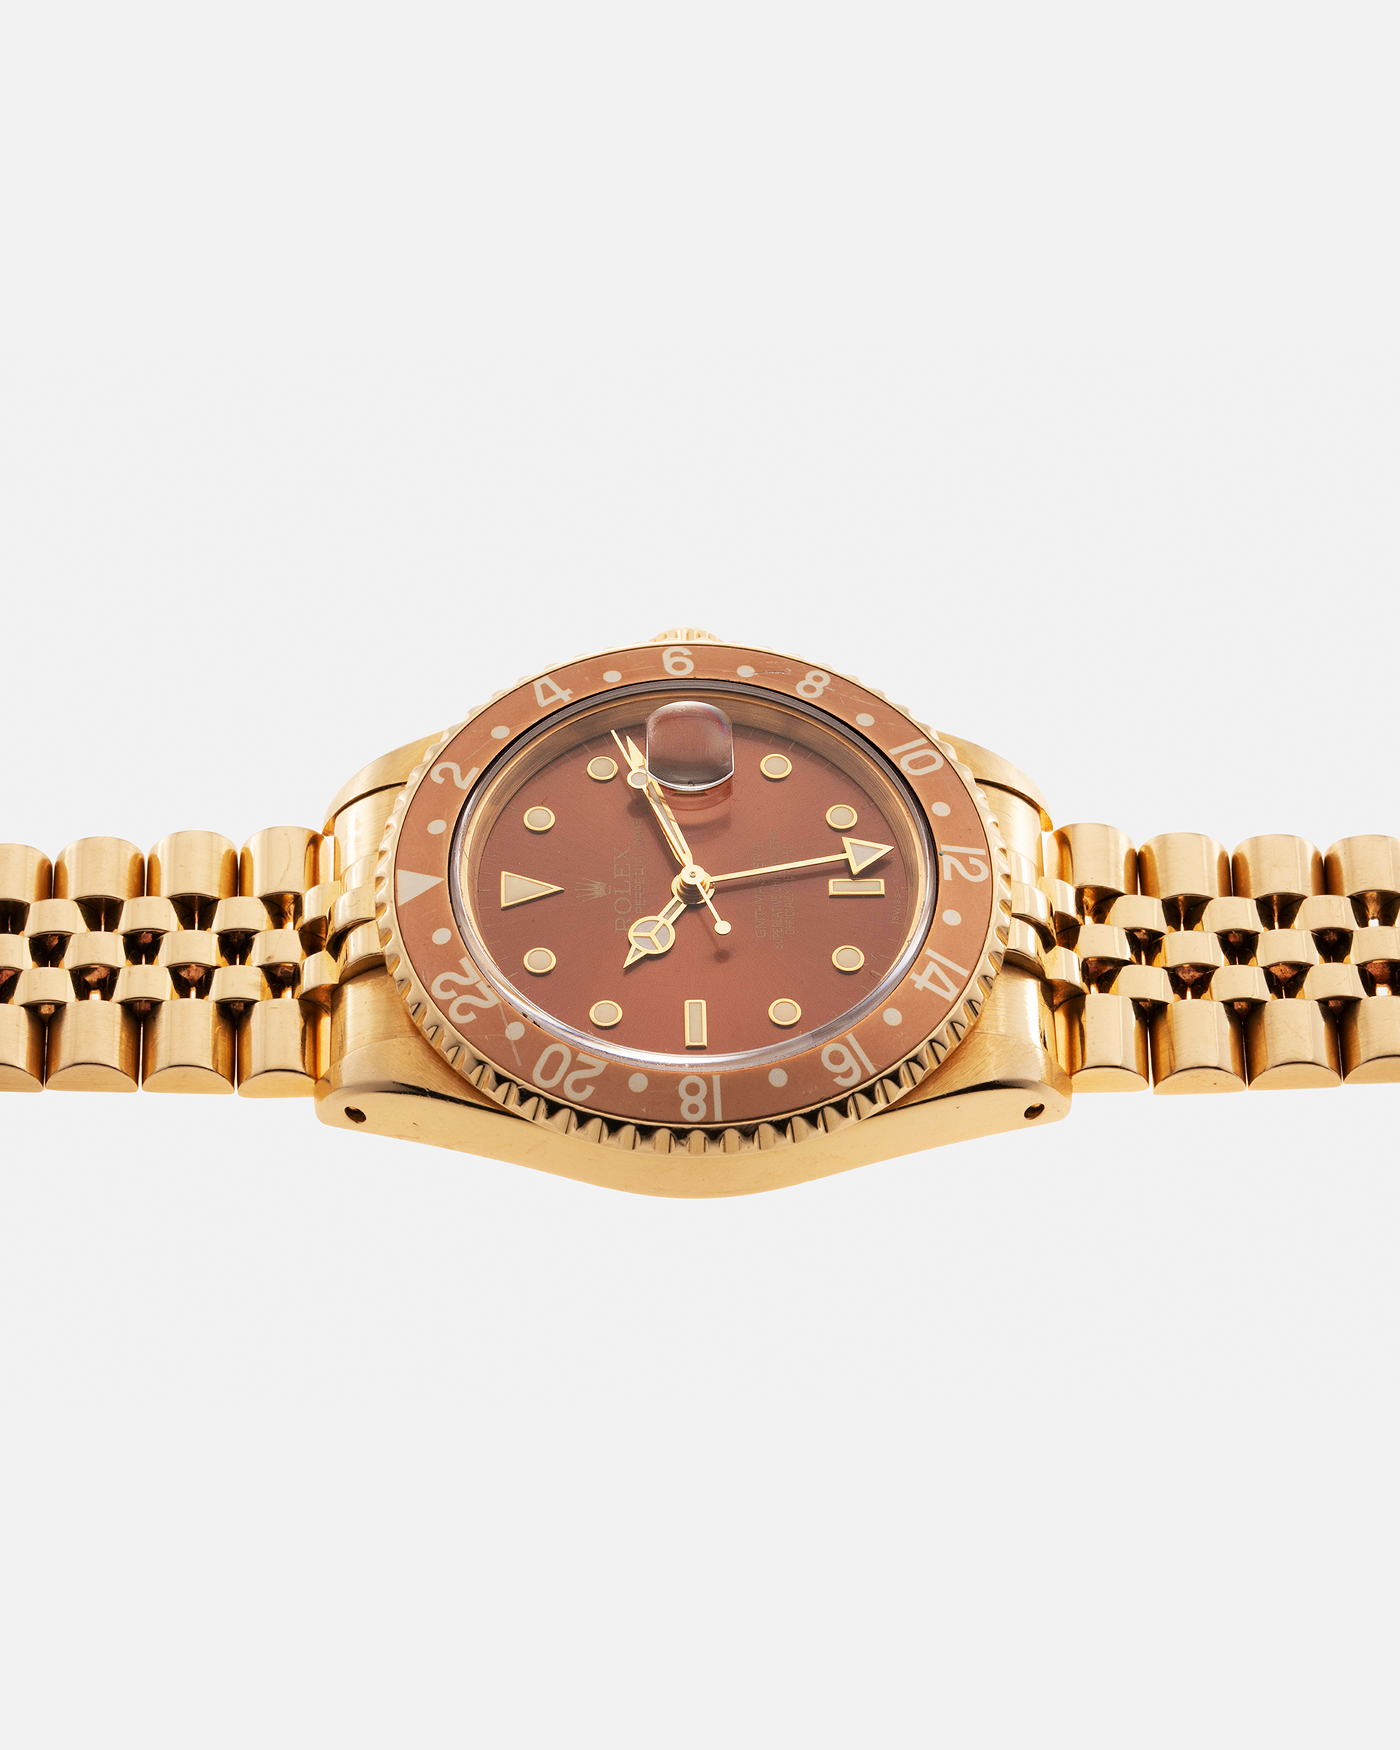 Brand: Rolex Year: 1994 Model: GMT Master II Reference Number: 16718 Serial Number: N281XXX Material: 18-carat Yellow Gold Movement: Rolex Cal. 3185, Self-Winding Case Diameter: 40mm Bracelet: Rolex 18-carat Yellow Gold 8386 Jubilee Bracelet with 47B Curved End Links